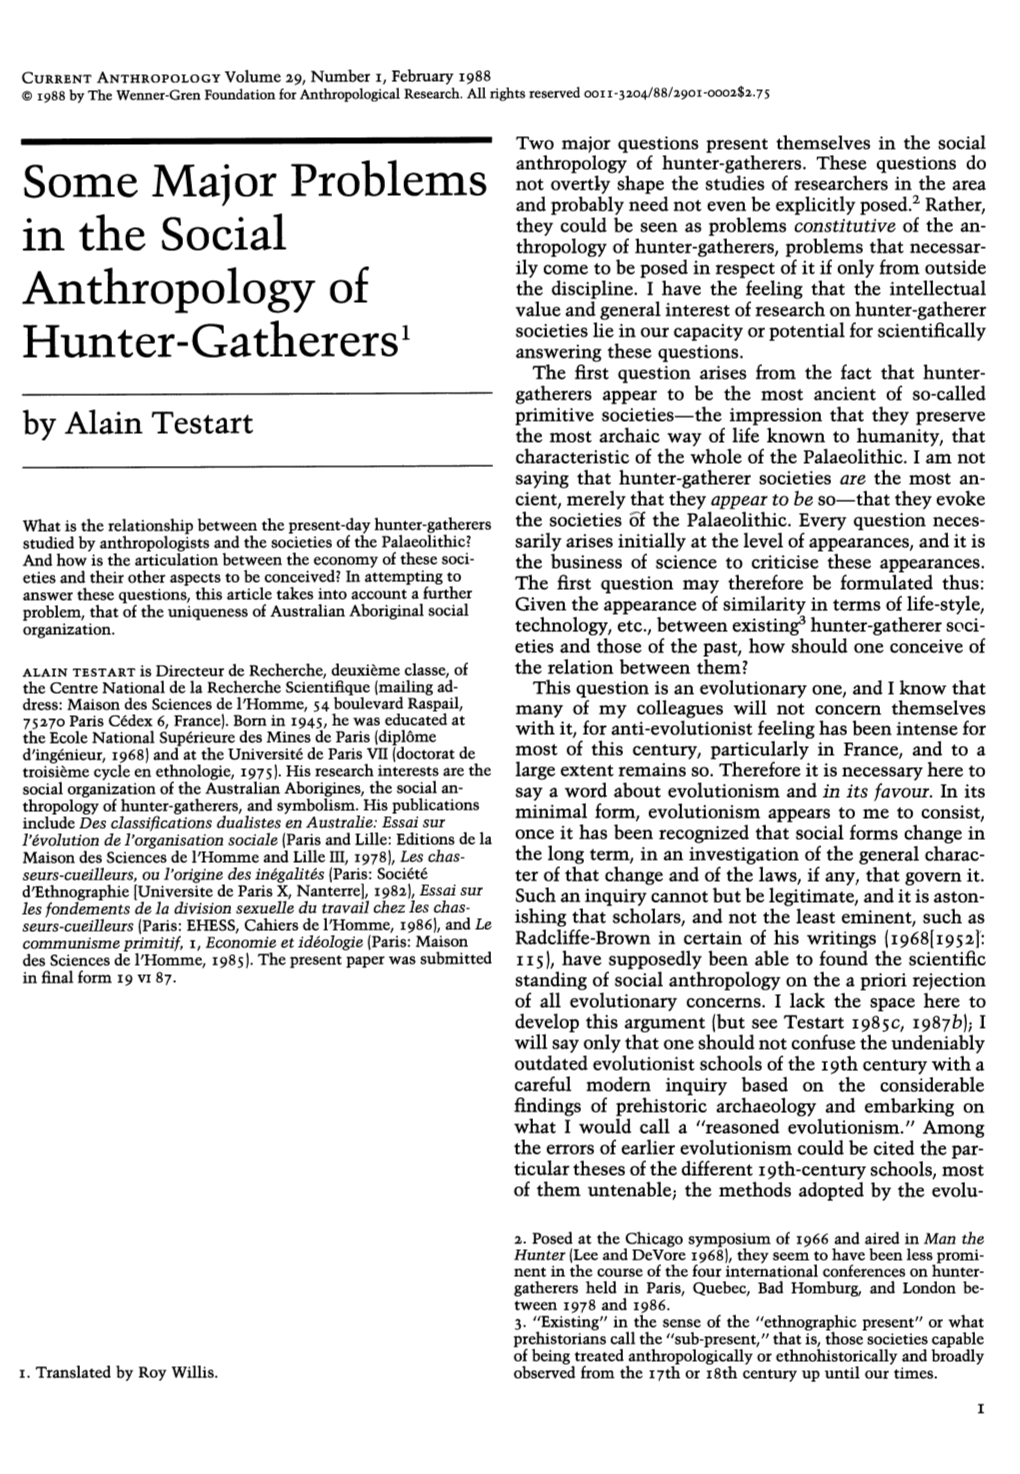 Some Major Problems in the Social Anthropology Of